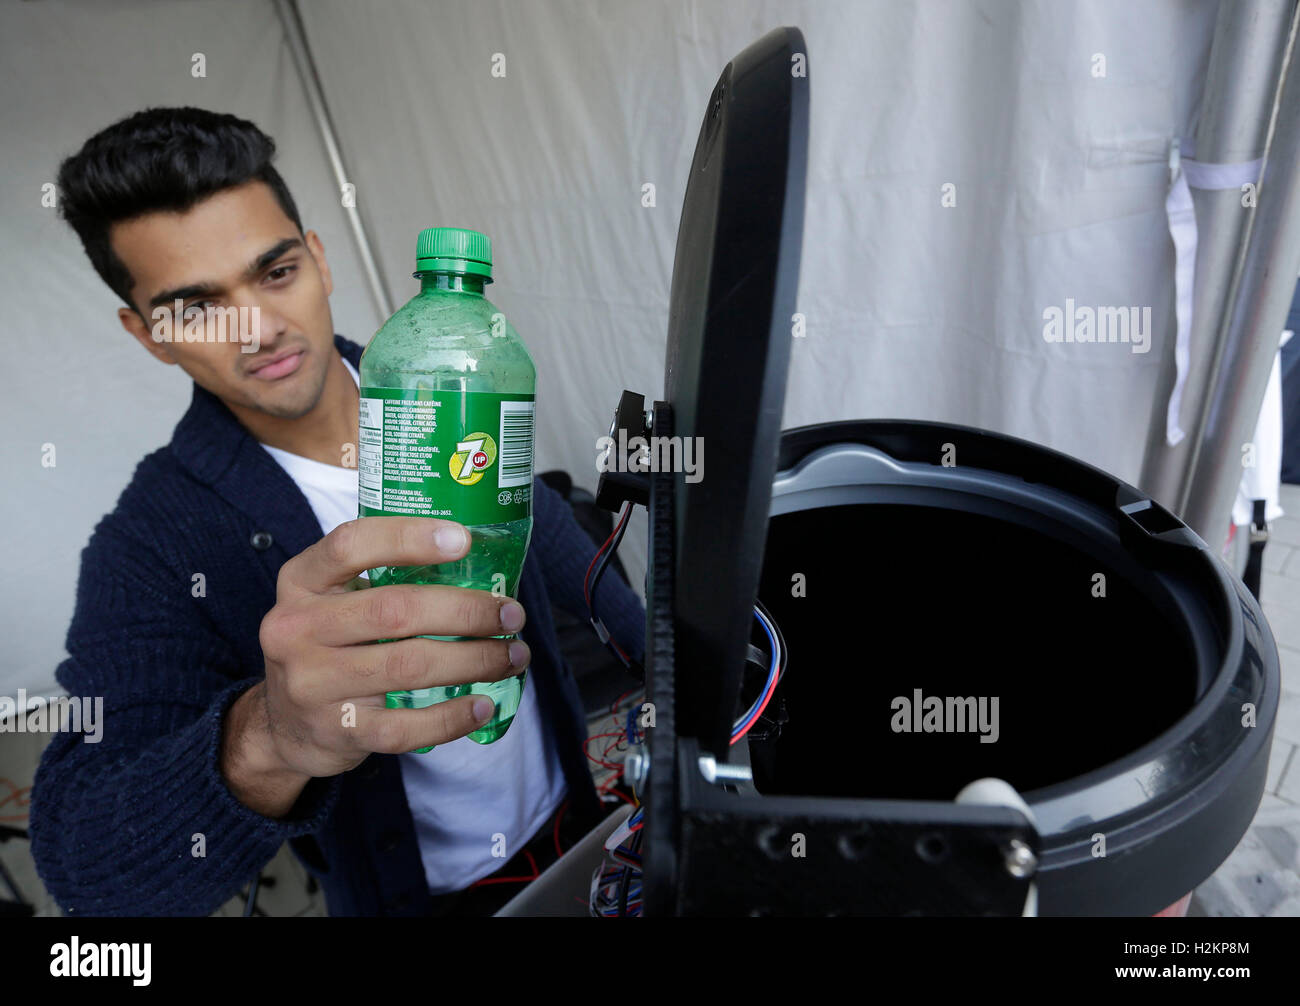 (160929) -- VANCOUVER, Sept. 29, 2016 (Xinhua) -- A graduate student of Simon Fraser University shows an intelligent garbage bin which can sort out different garbage by reading barcodes during the Greater Vancouver Clean Technology Expo in Vancouver, Canada, Sept. 28, 2016. About 40 companies and graduate students from Simon Fraser University showcased their latest innovations in clean technology during the expo. (Xinhua/Liang Sen) (zw) Stock Photo